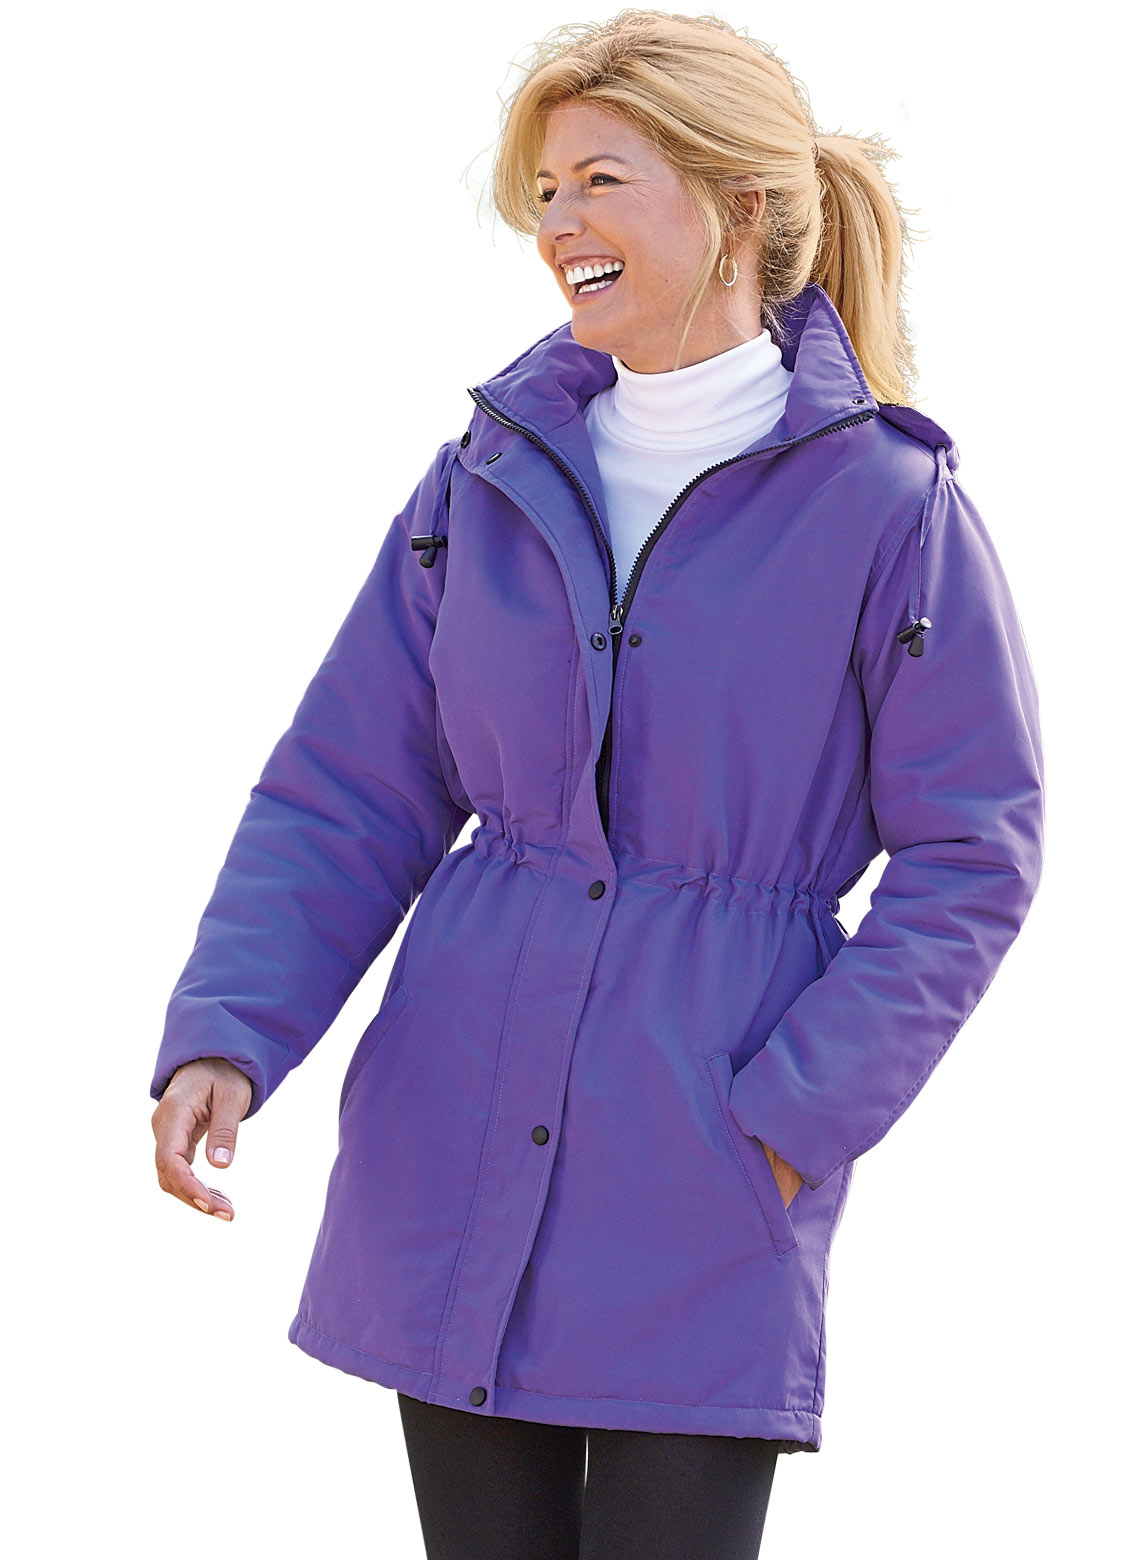 Women's Anorak Jacket Weather Resistant with Zip Up Snap Up Front and Detachable Hood Available in Standard and Plus Sizes - image 1 of 3